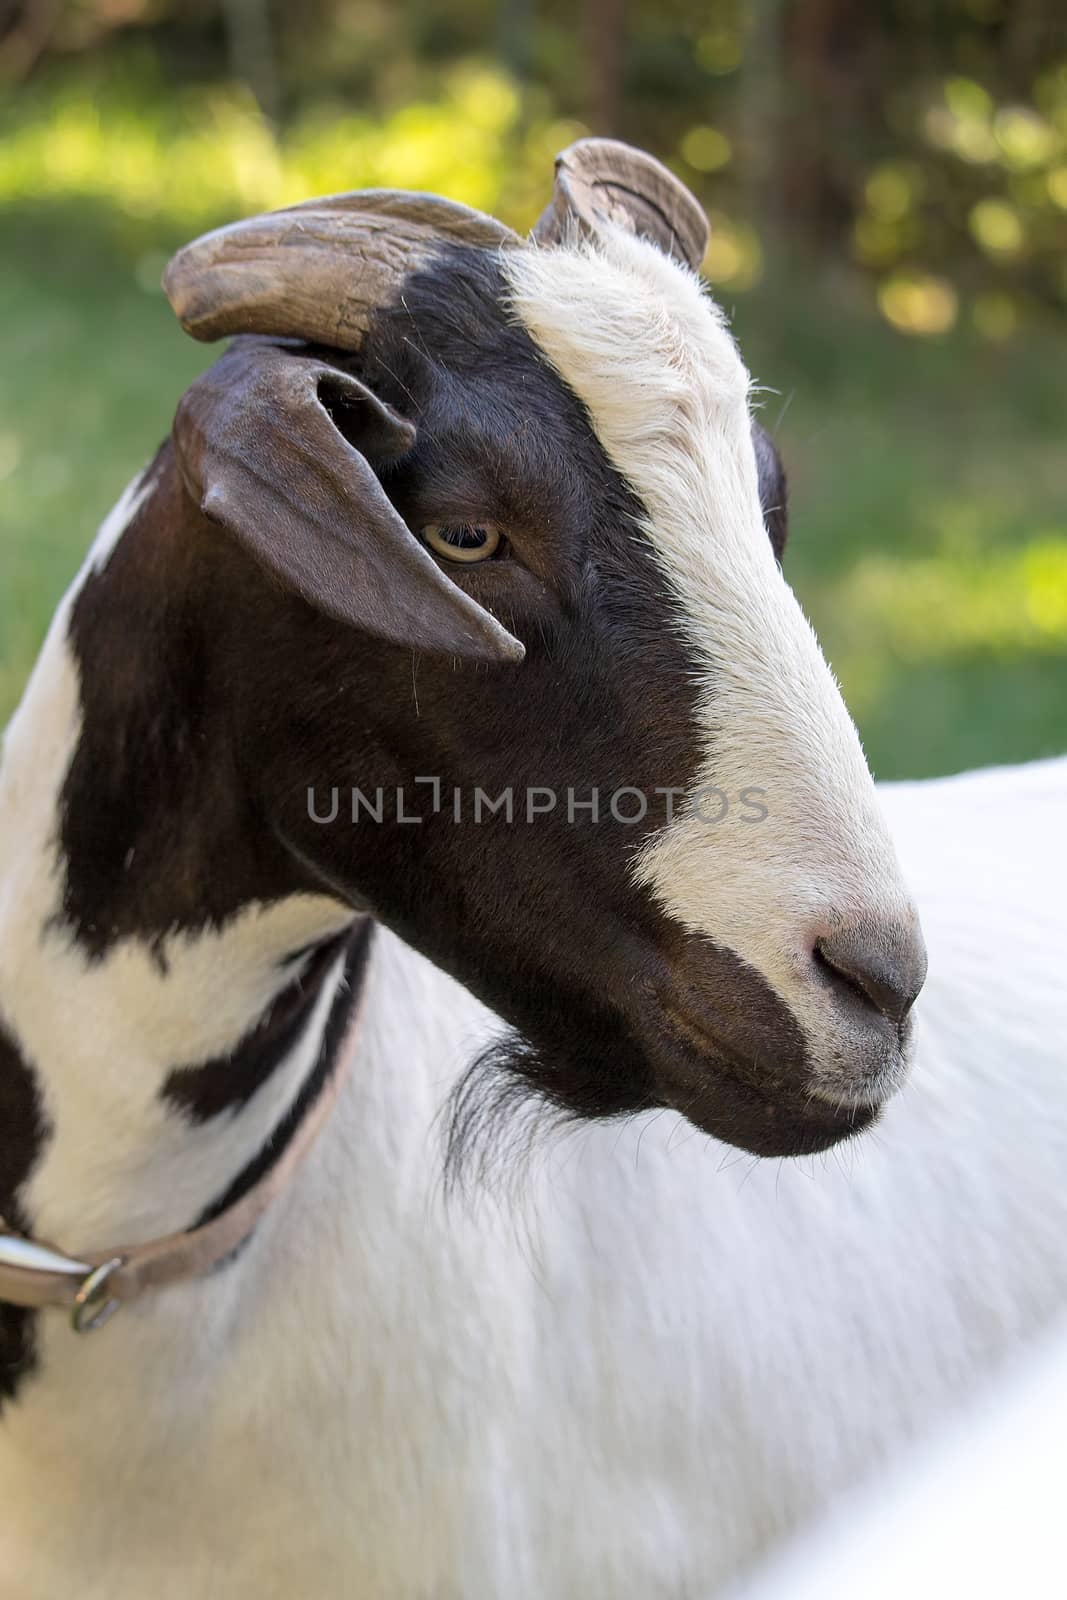 Black and White Goat Closeup Portrait by jpldesigns